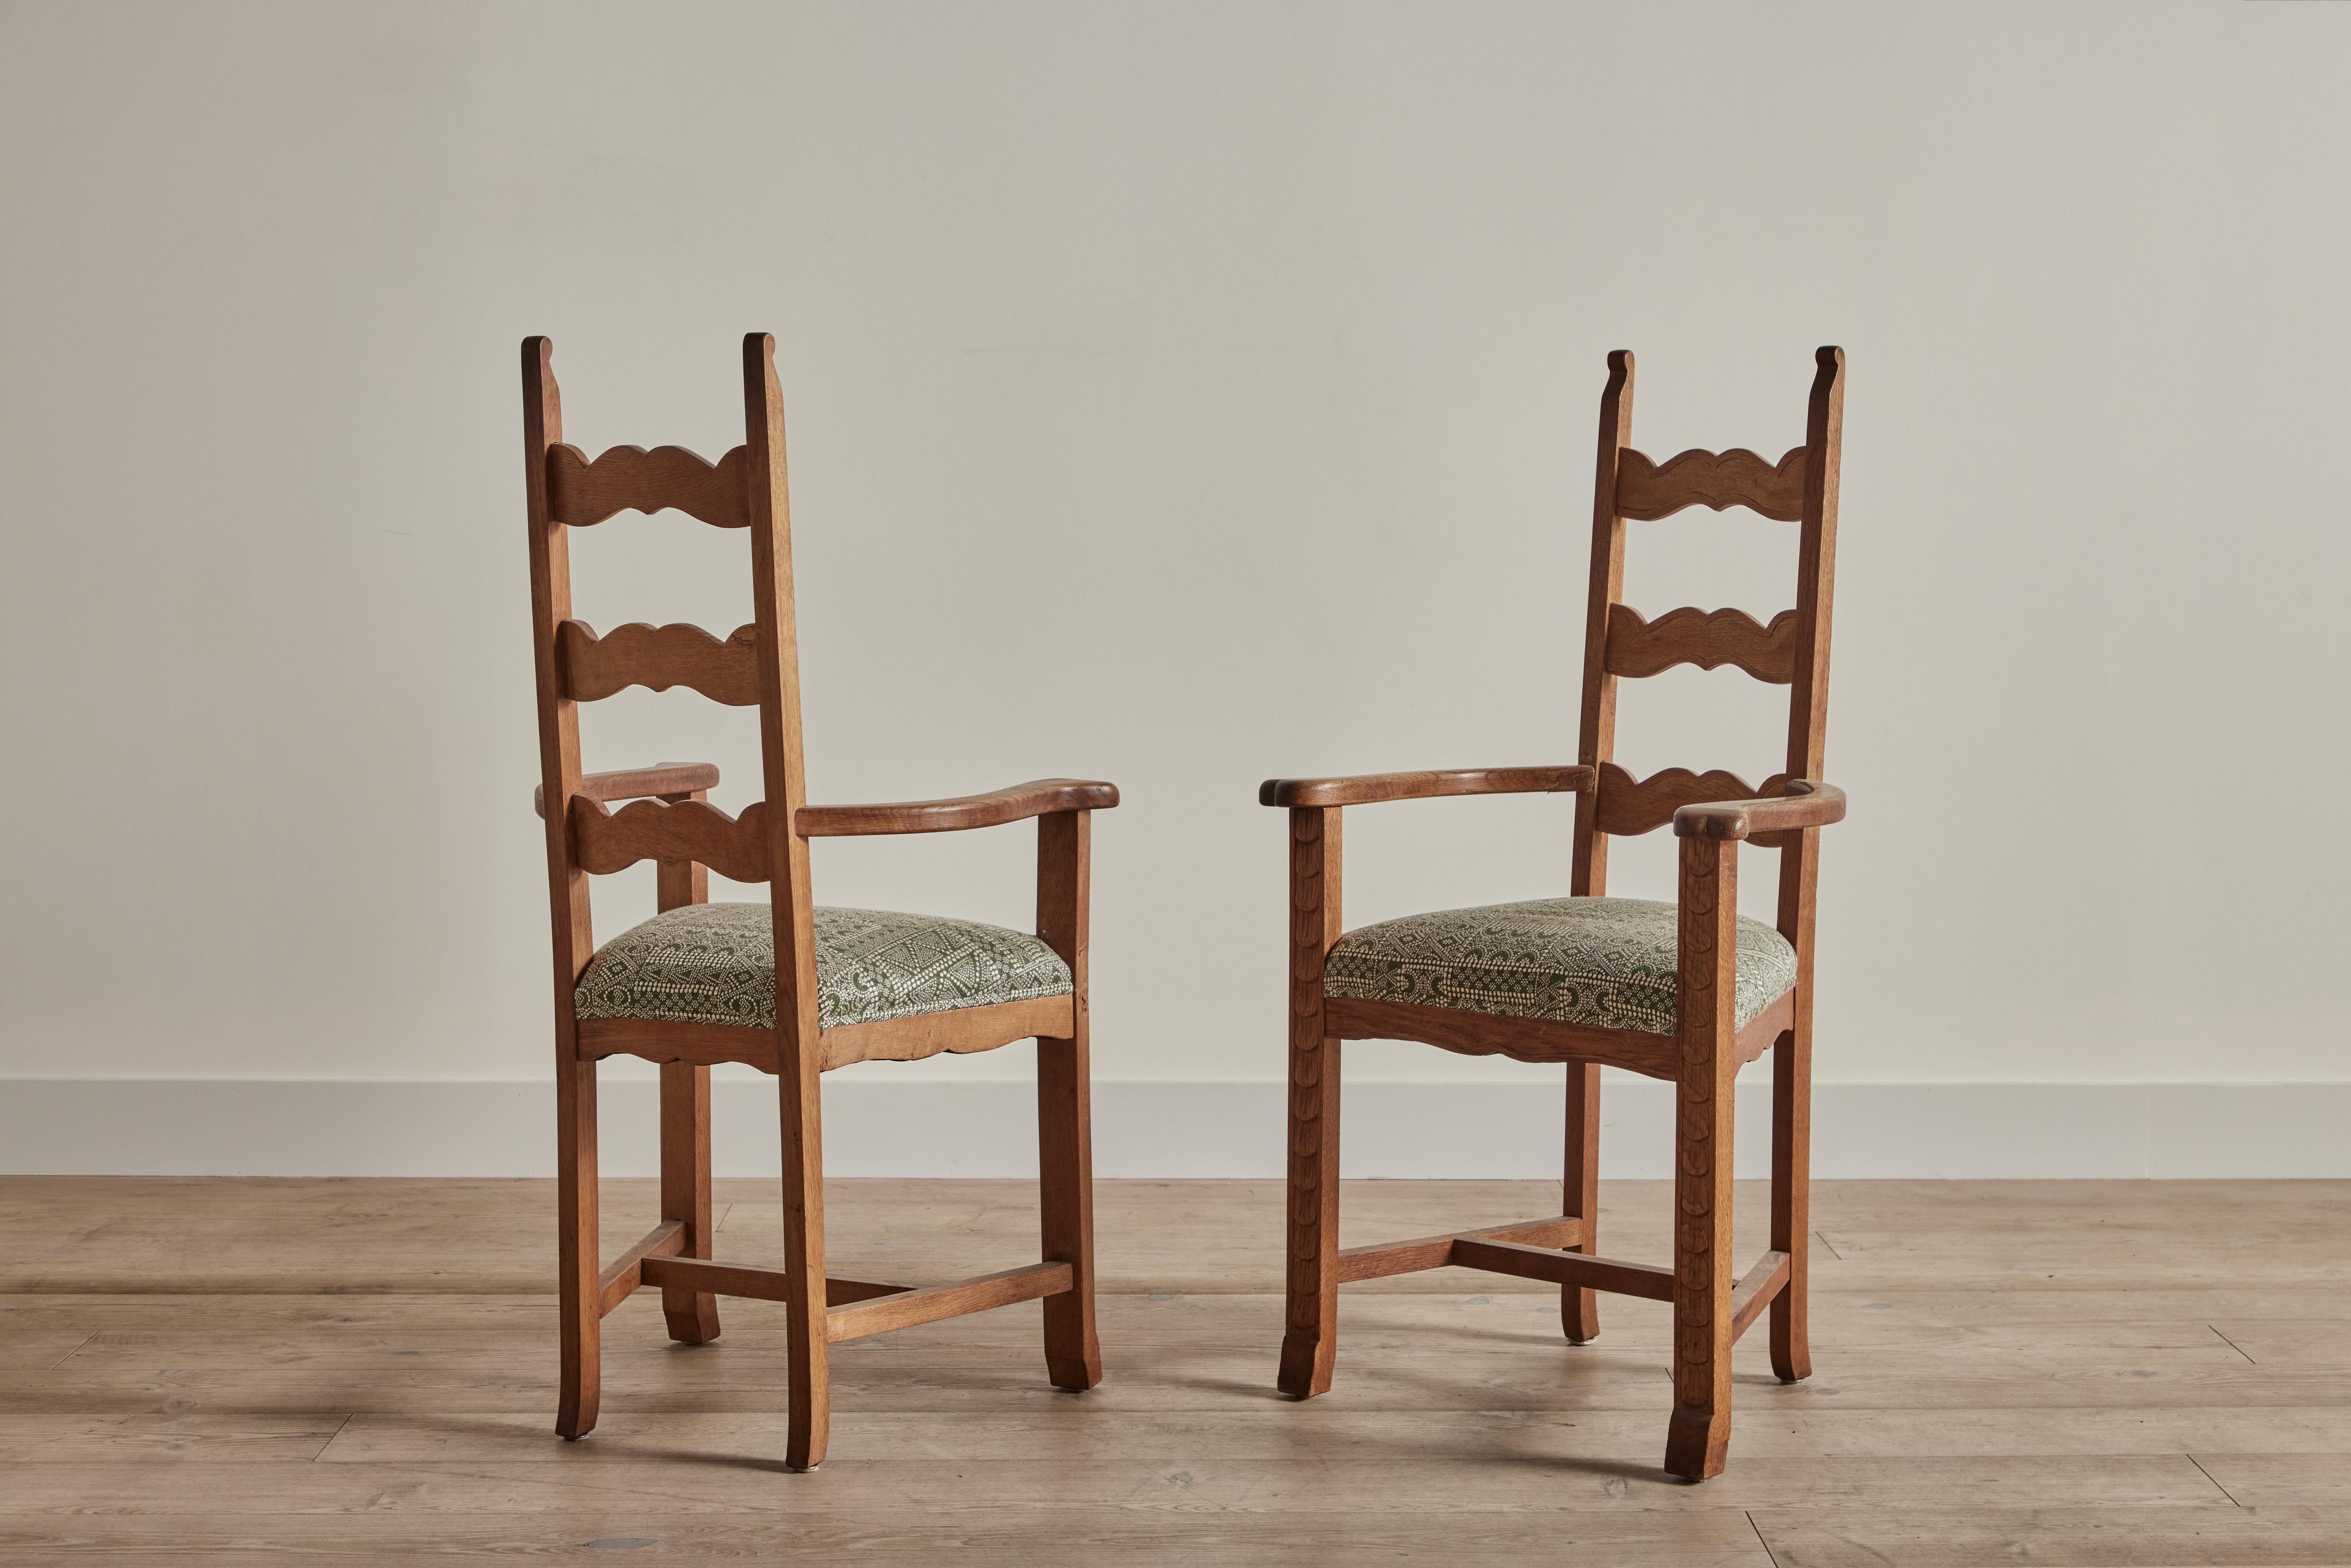 Pair of carved oak wood armchairs attributed to Danish designer Henning Kjaernulf circa 1960. Seats are newly upholstered in Susan Deliss weave in Batik Moss.